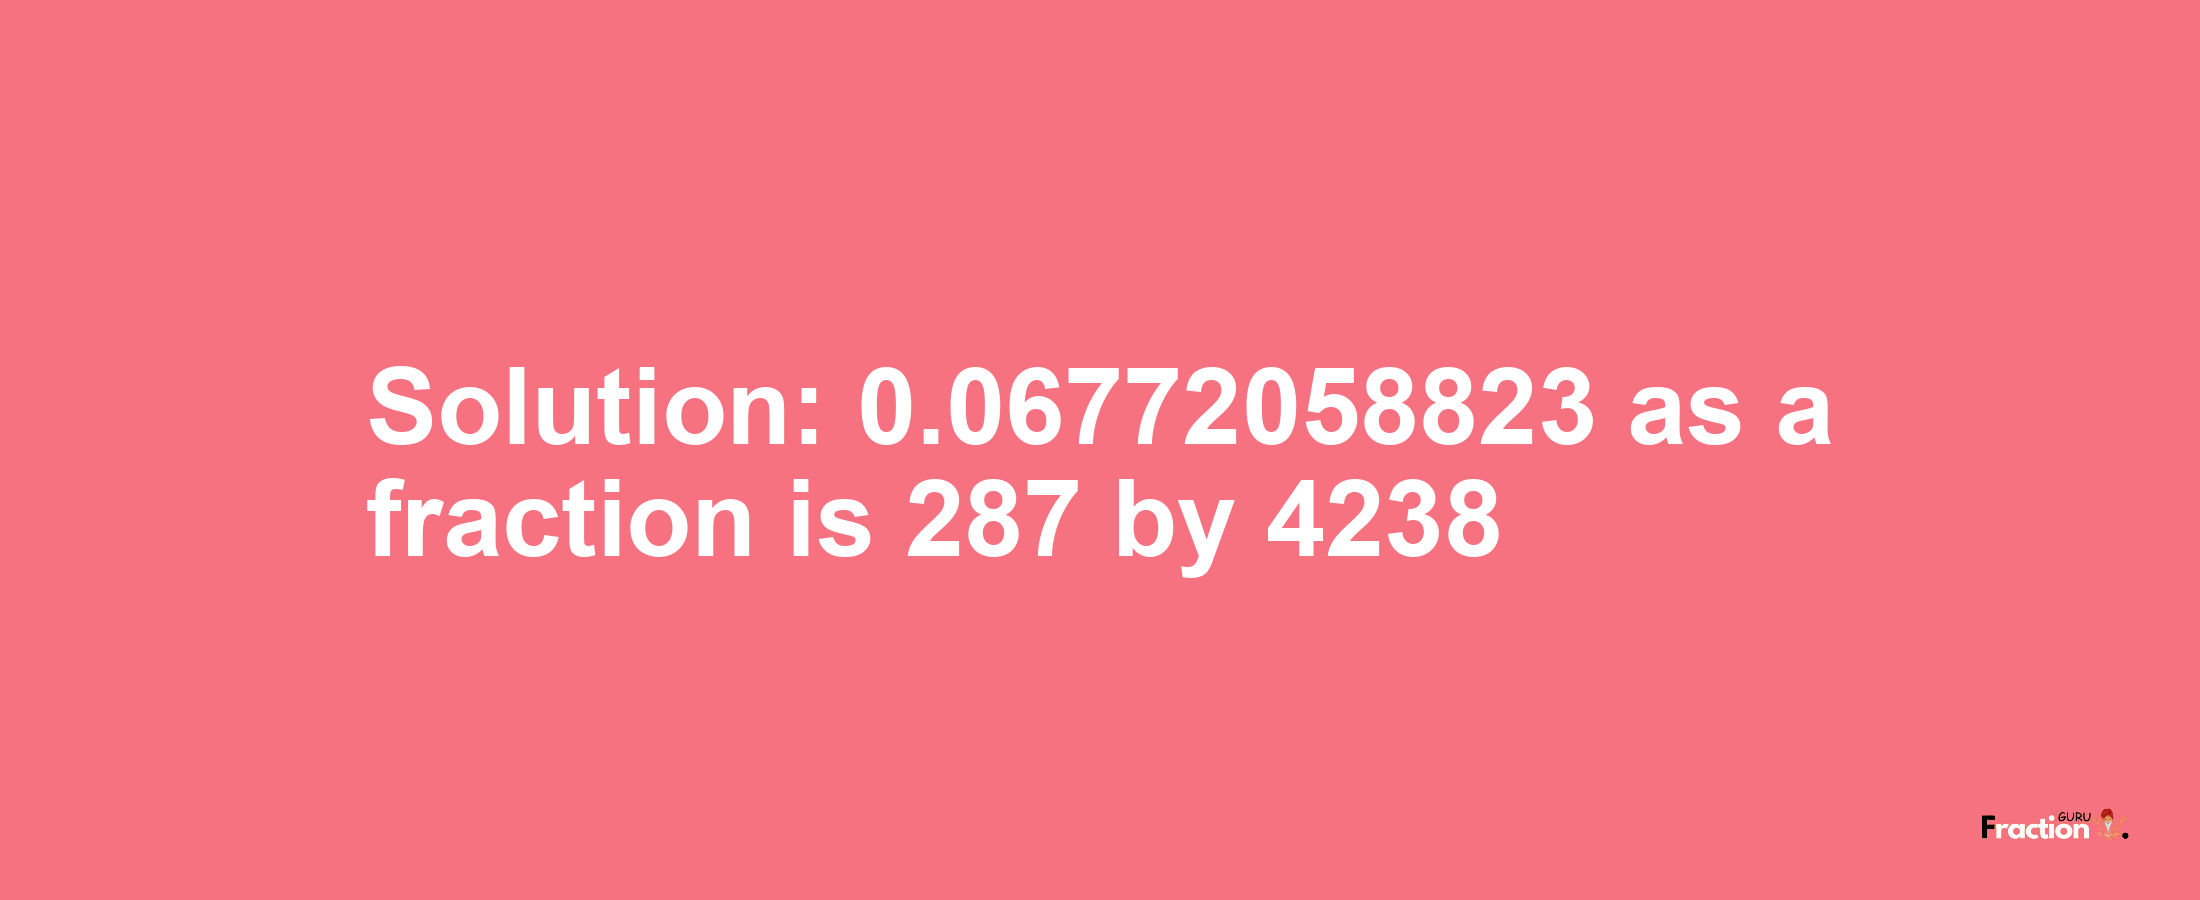 Solution:0.06772058823 as a fraction is 287/4238